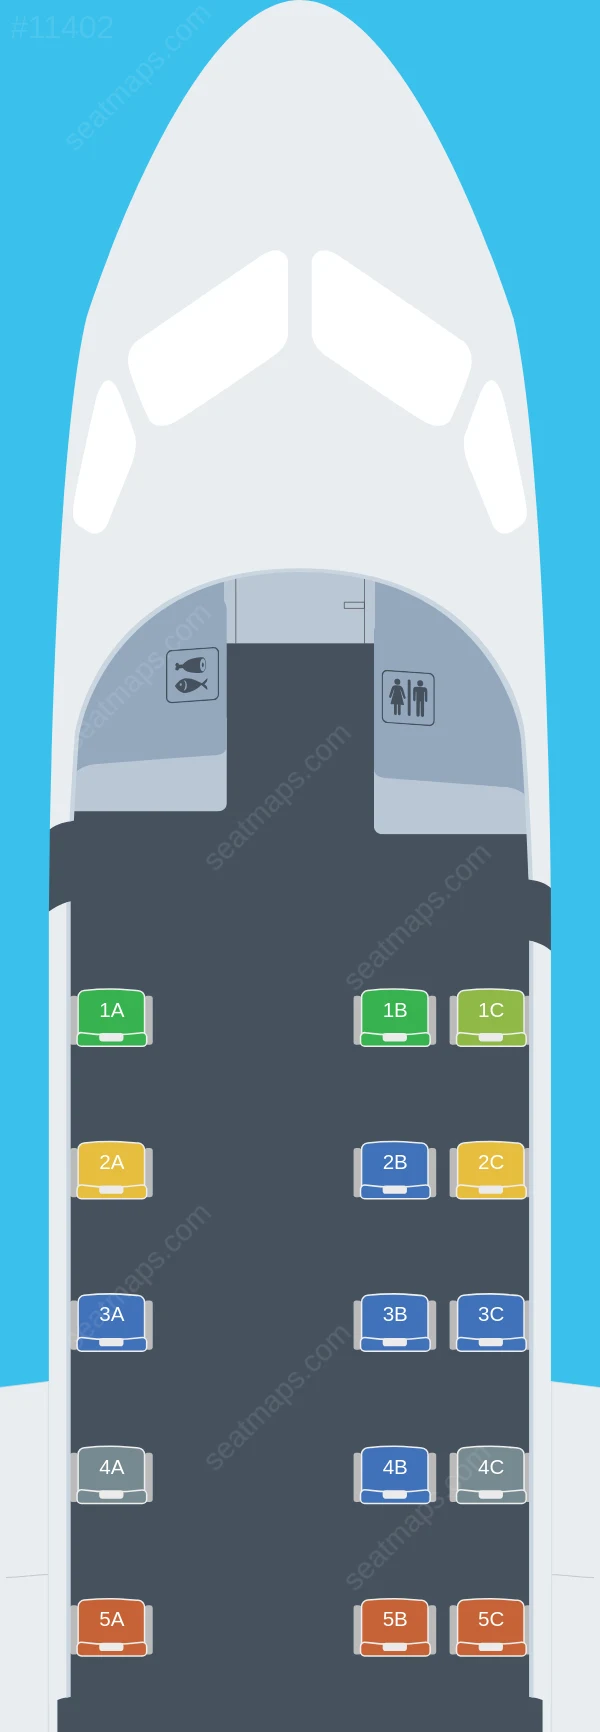 Lulutai Airlines Saab S340 seatmap preview